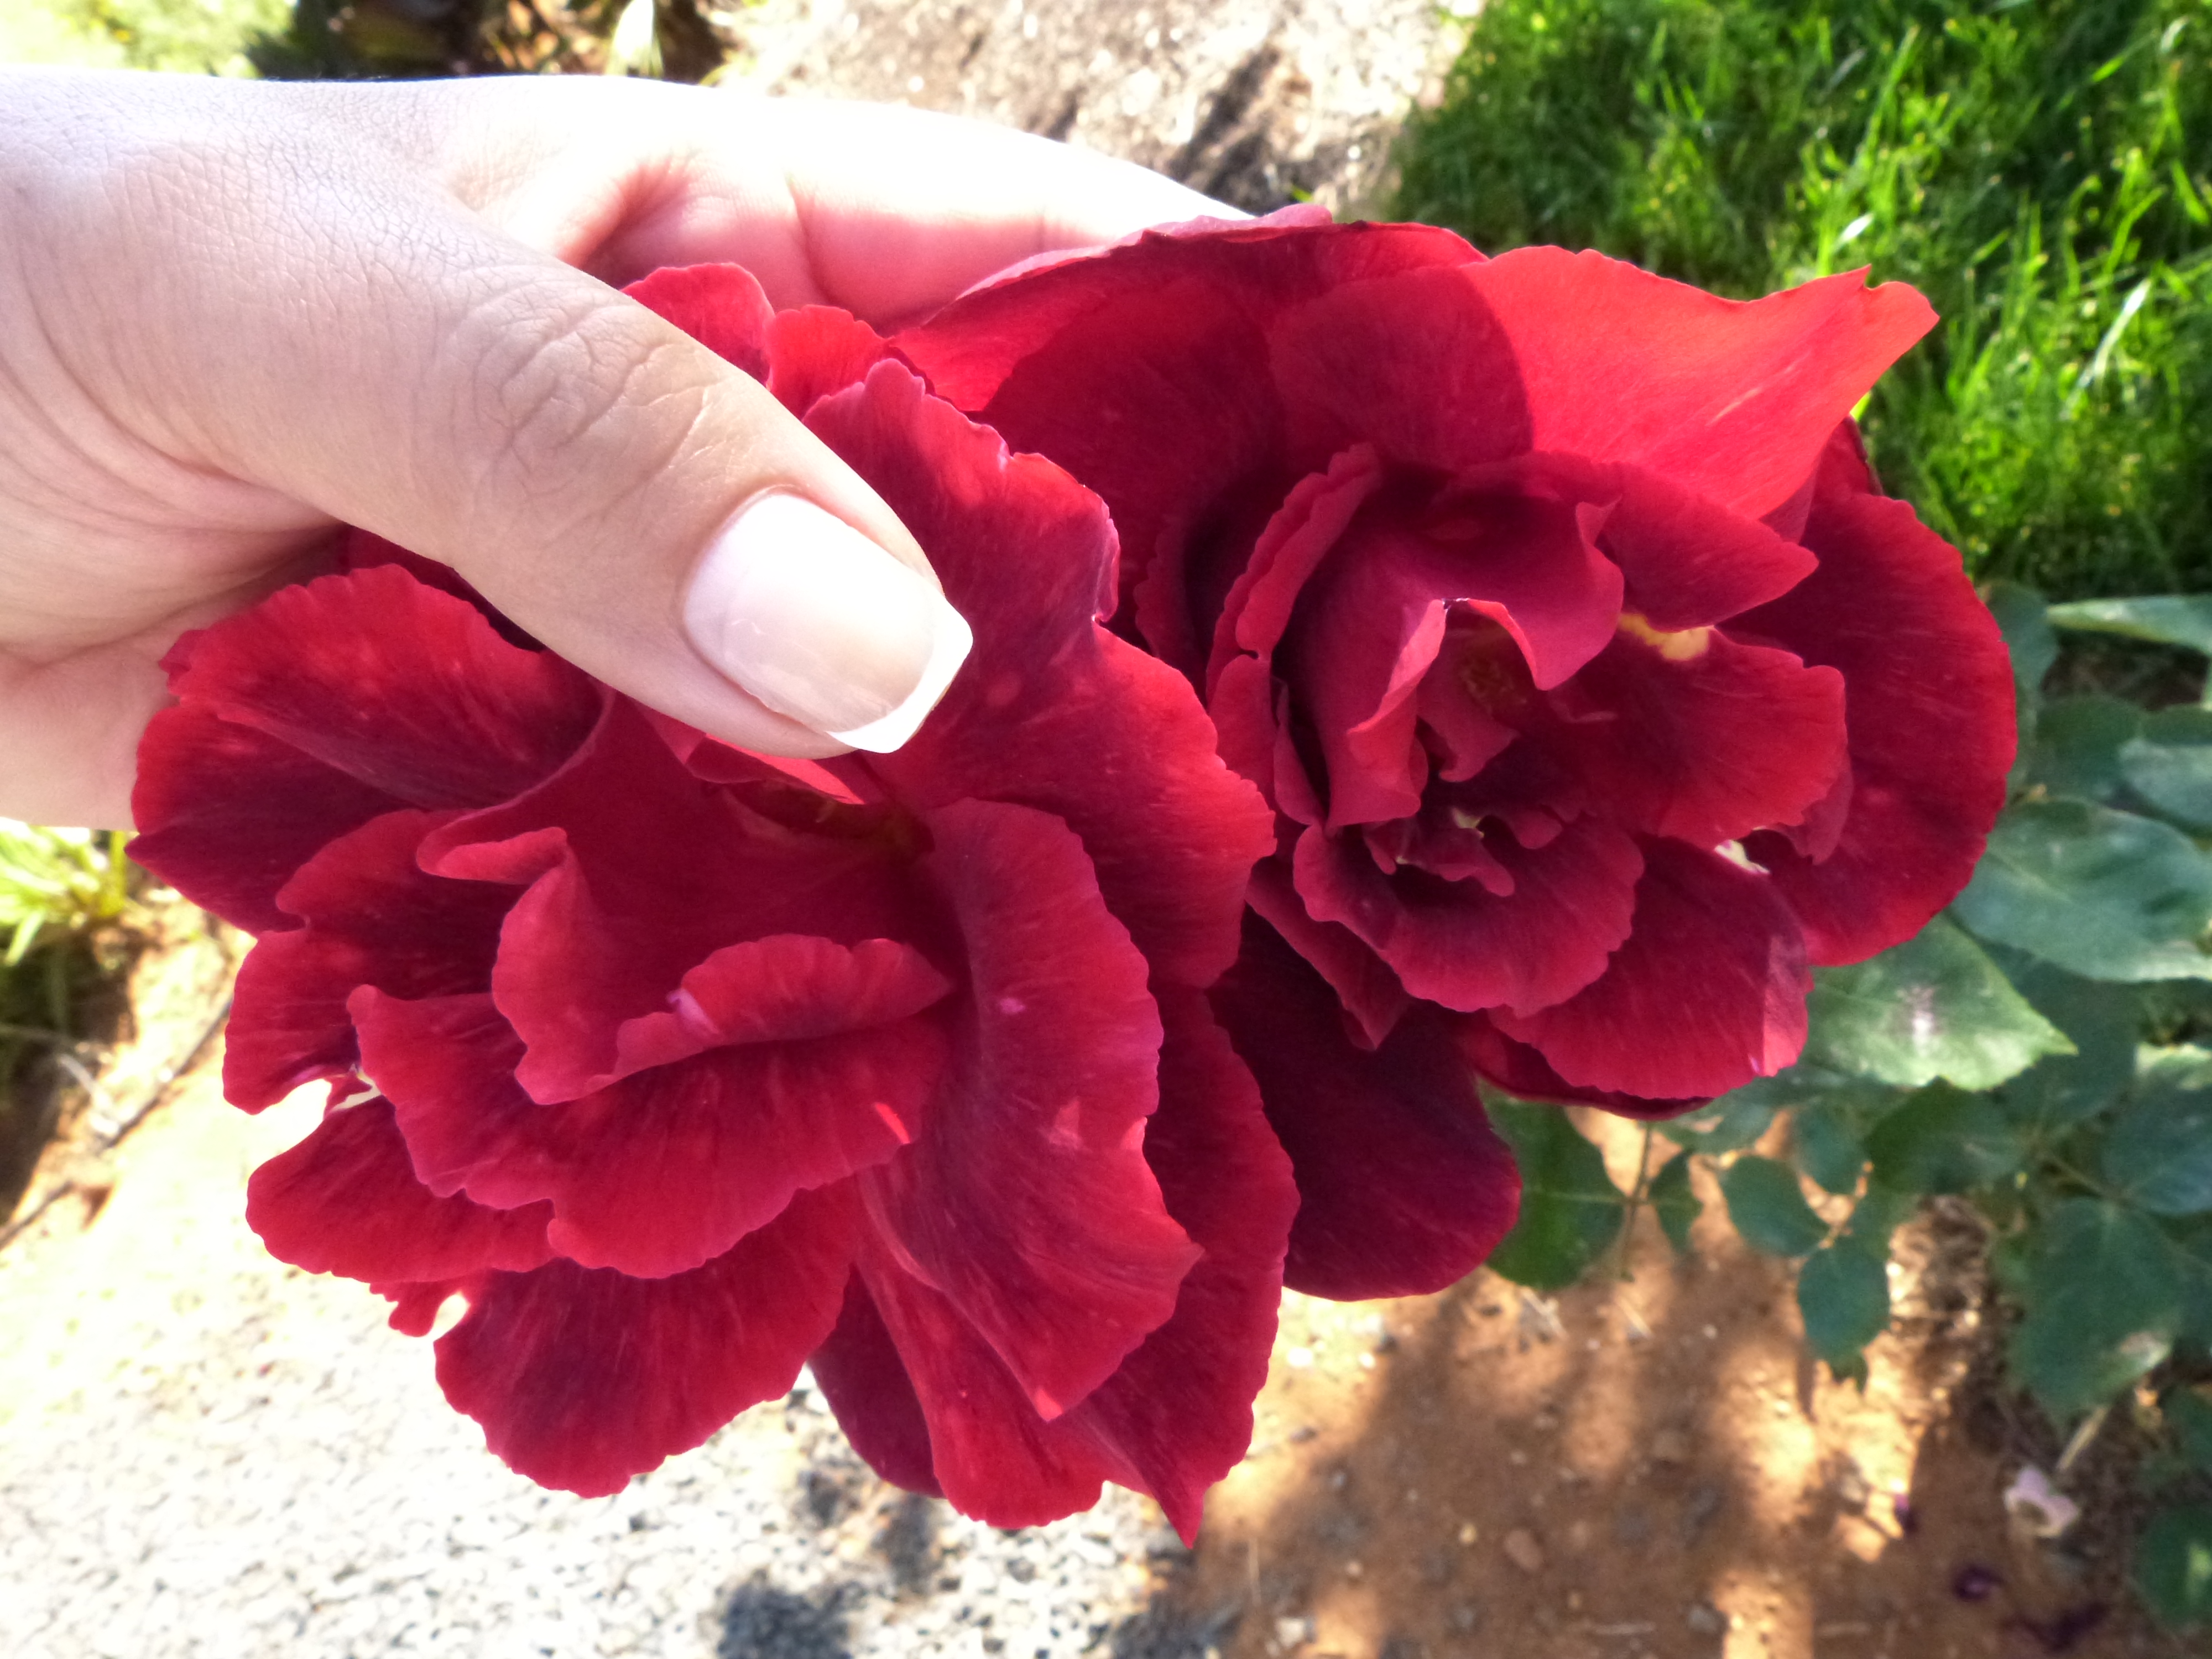 A French manicured hand holds a red rose.